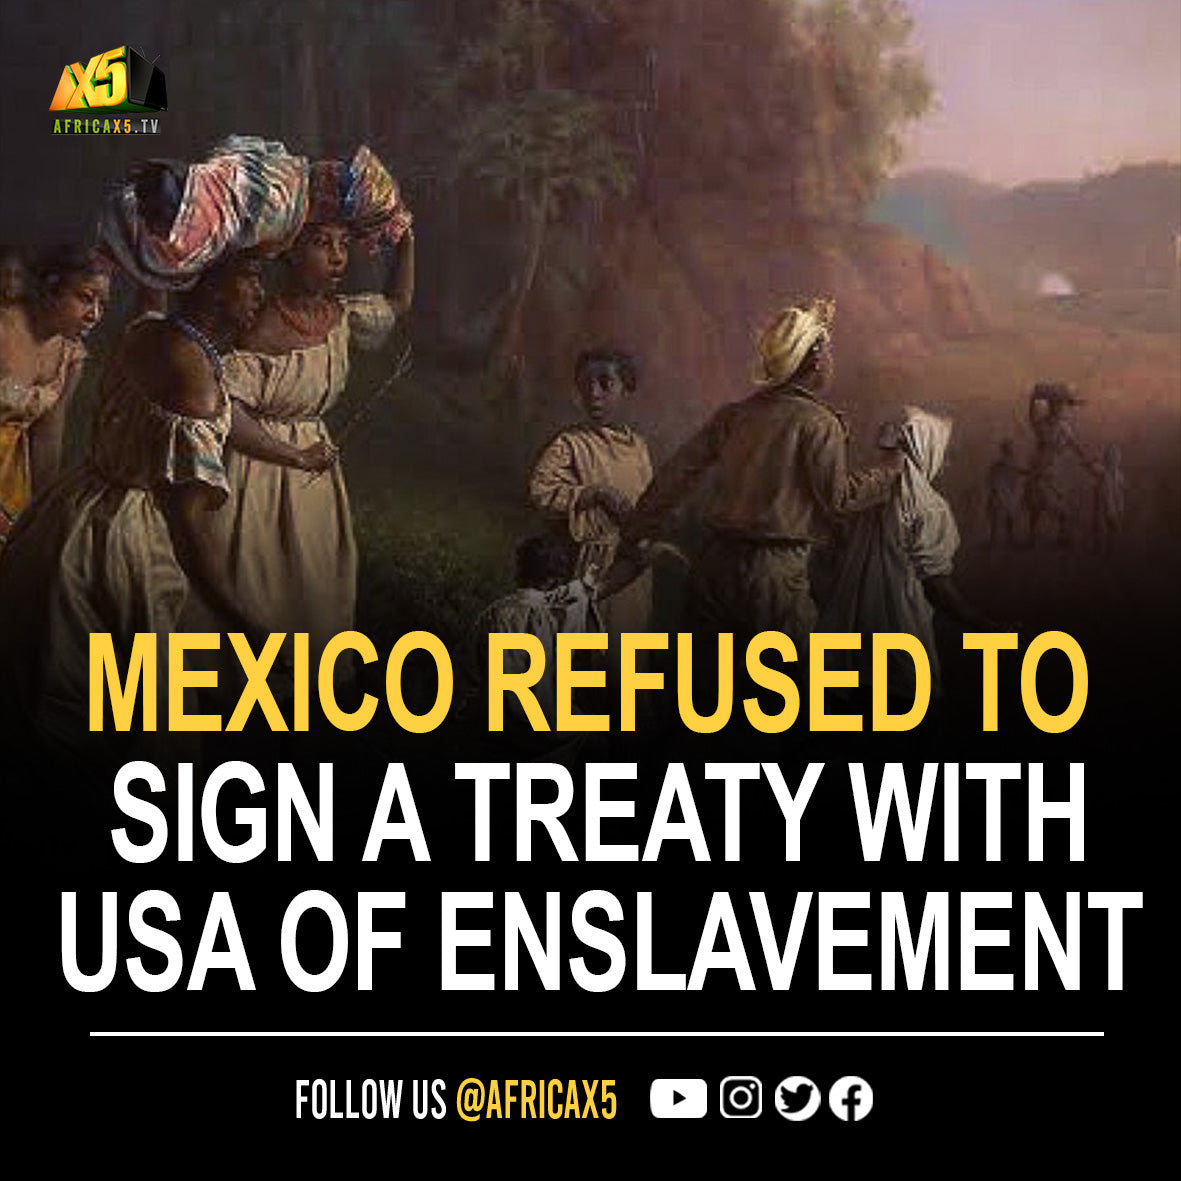 Mexico abolished slavery in 1829. Enslaved people were escaping to Mexico. The U.S. tried to get Mexico to sign a fugitive slave treaty to return escapees but Mexico refused to sign such a treaty